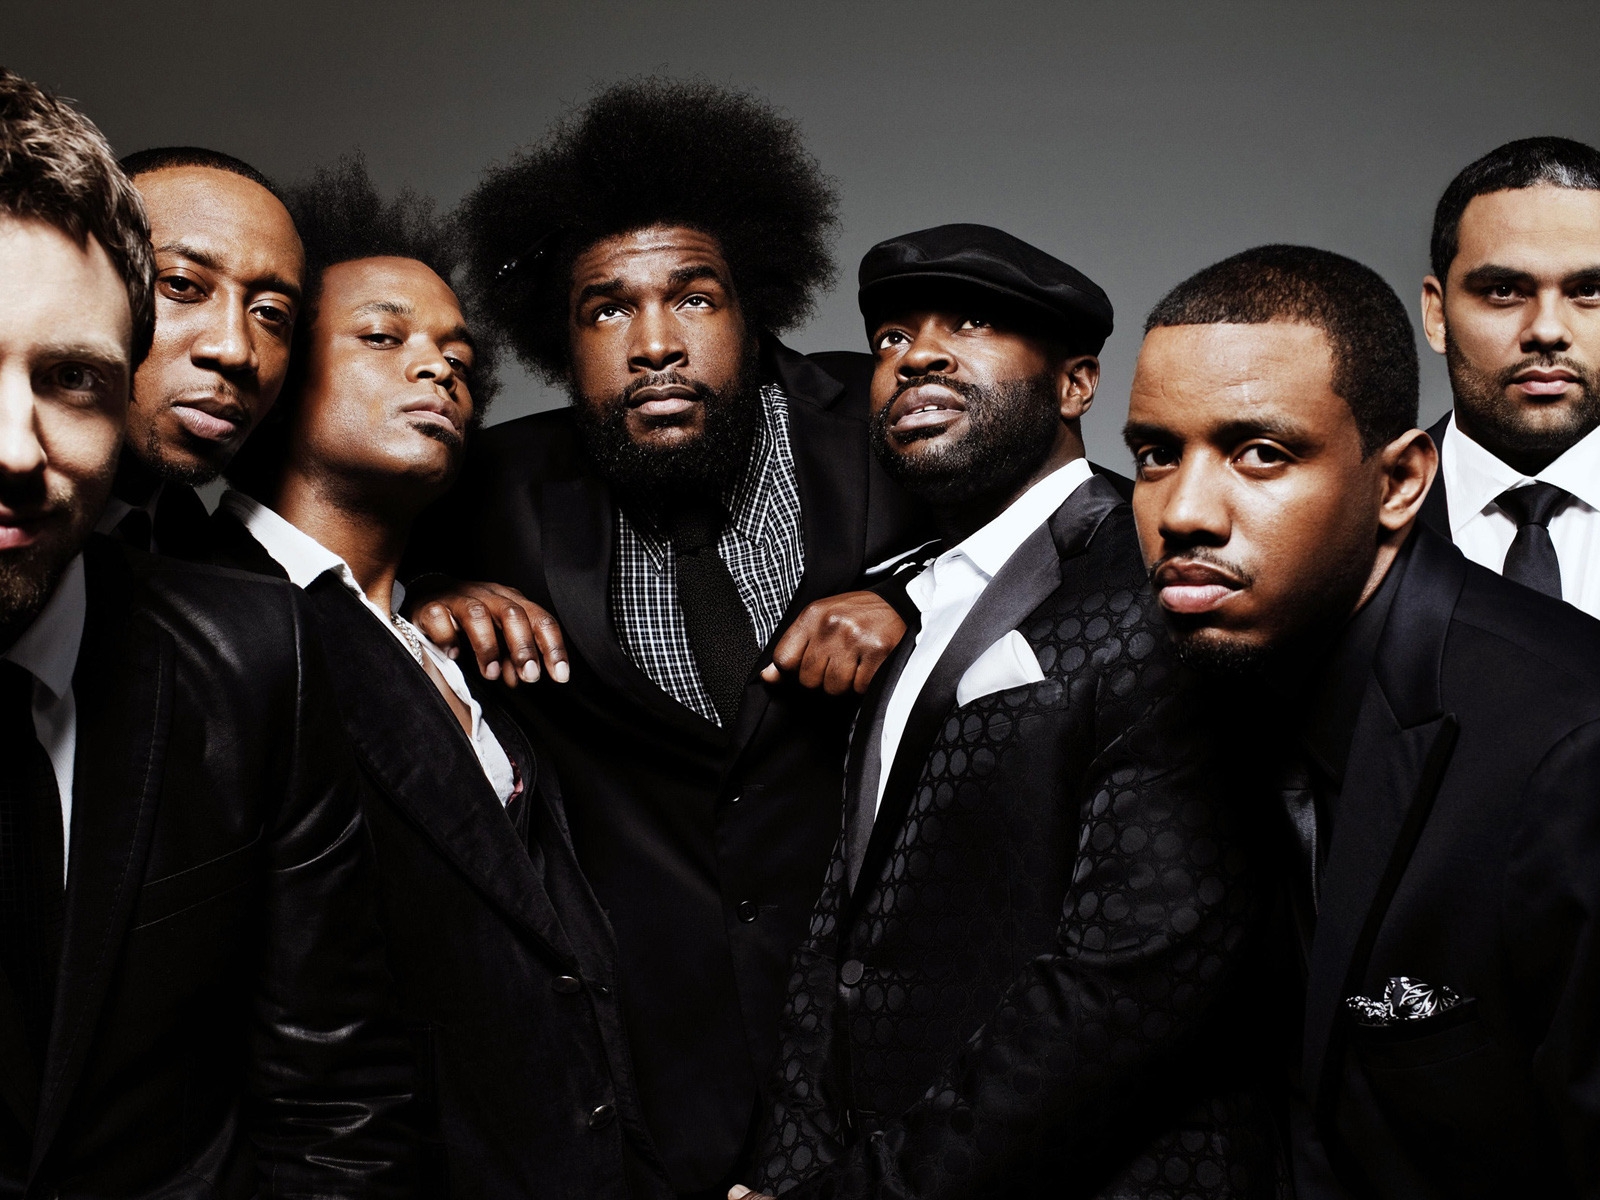 The Roots Band Photo Session for 1600 x 1200 resolution